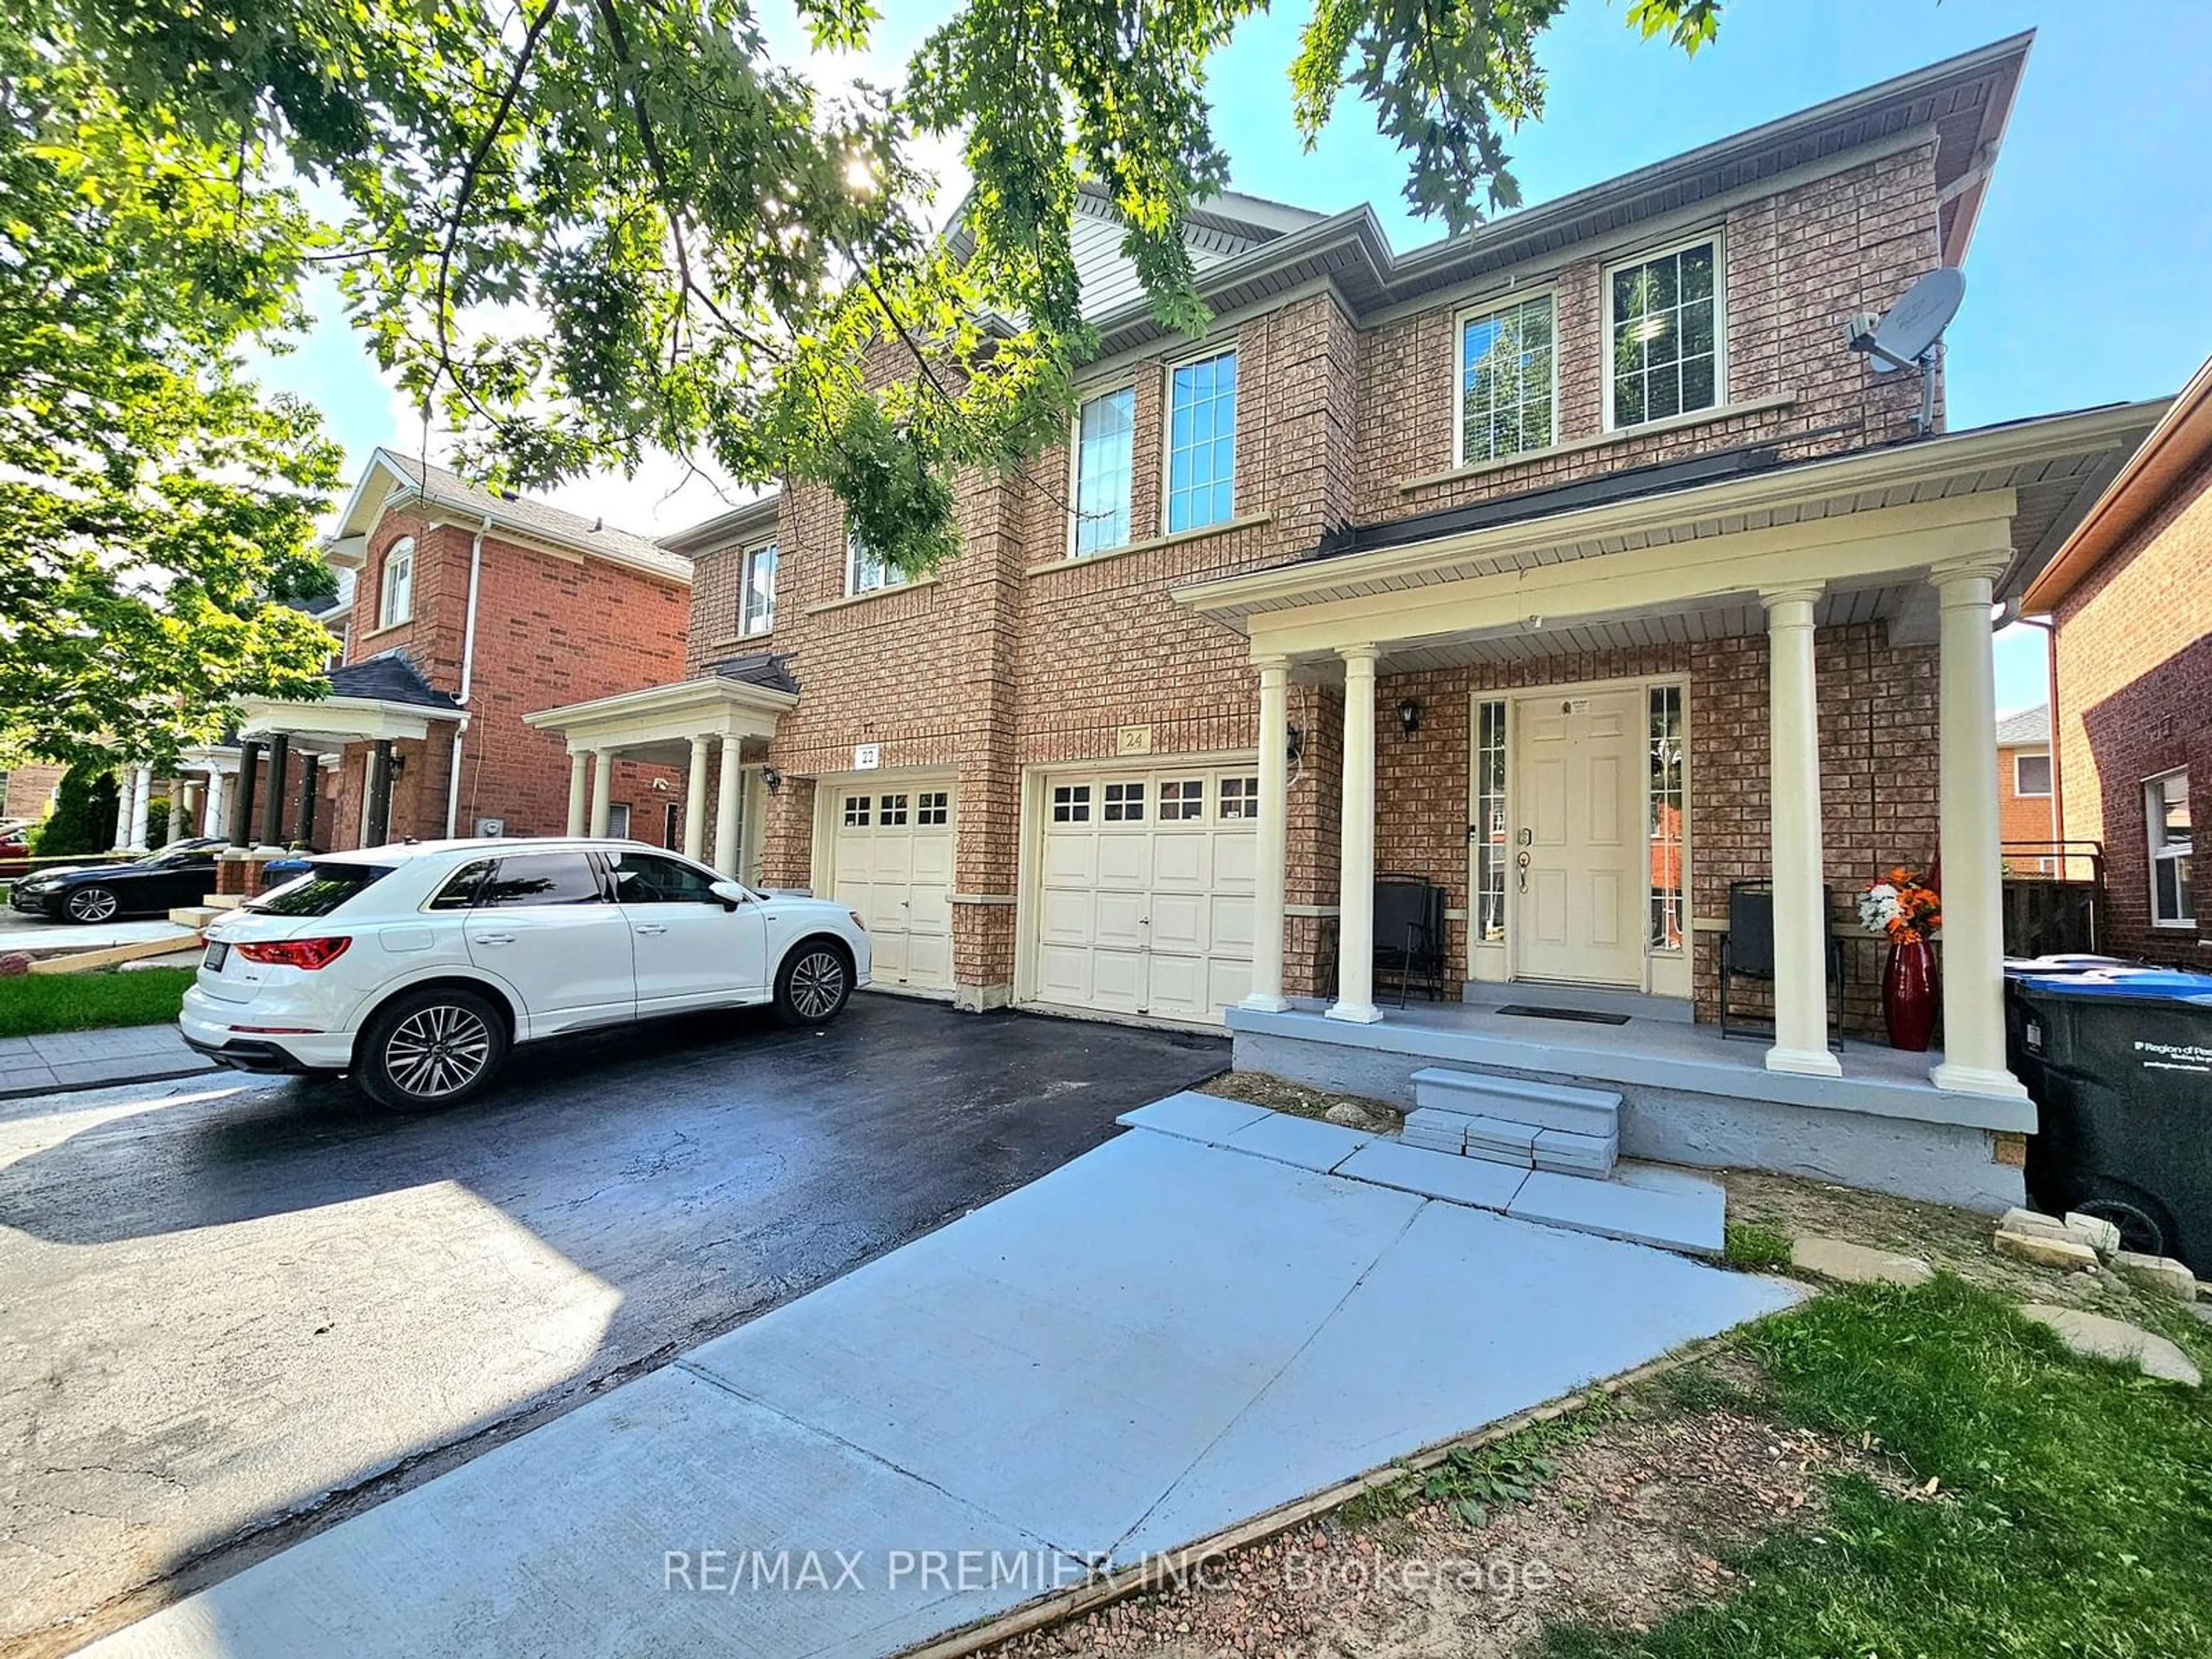 Home with brick exterior material for 24 Rivermere Crt, Brampton Ontario L7A 1R4